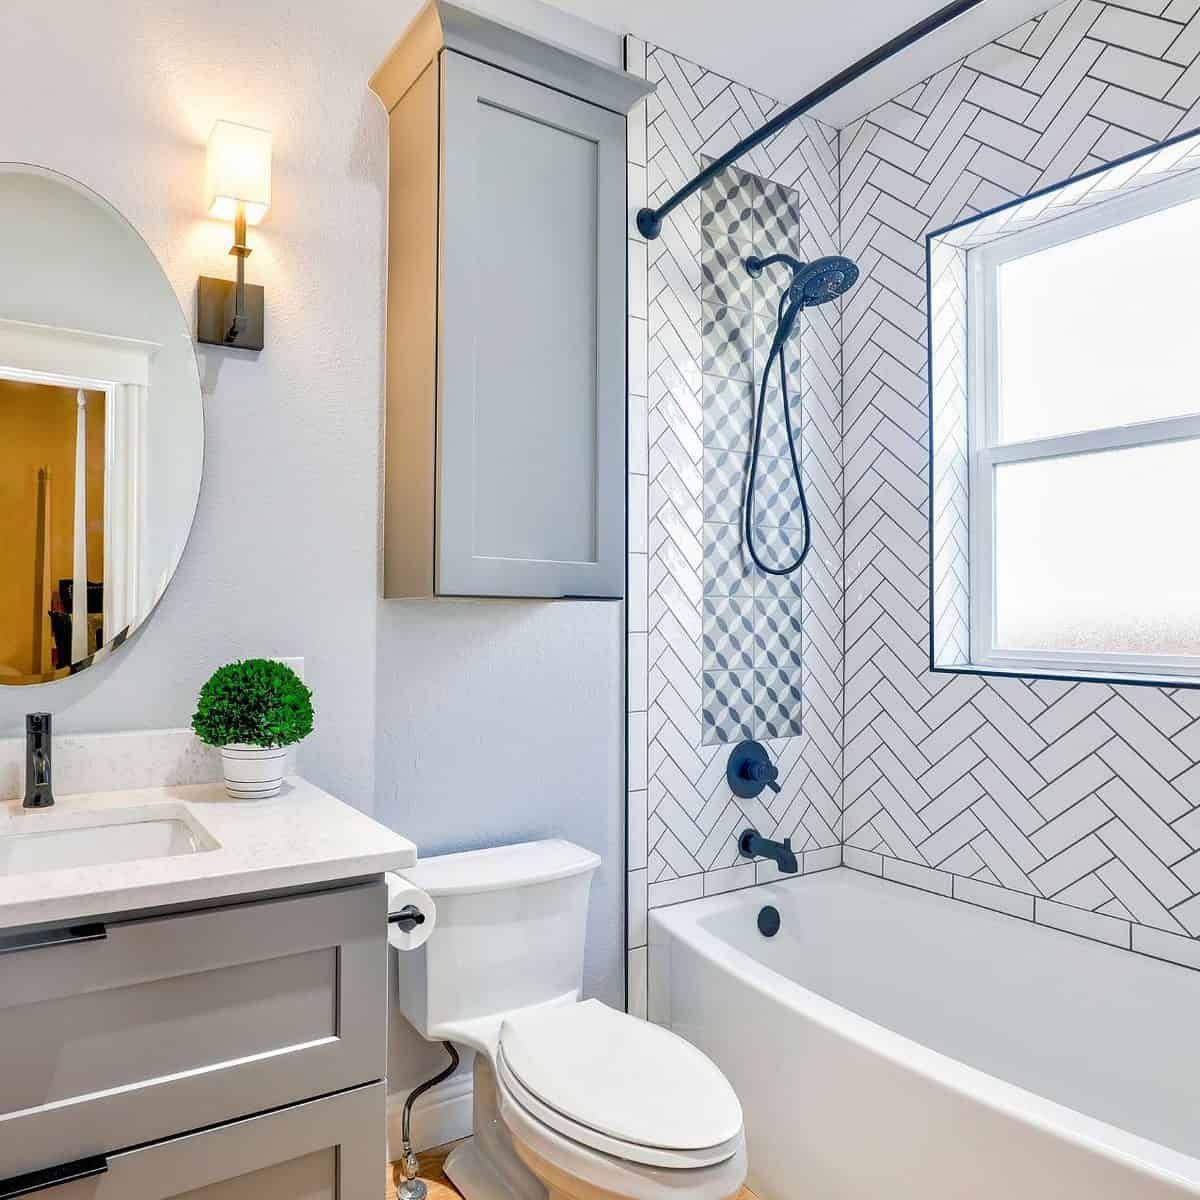 Bathroom with a sink on the left, toilet in the middle and a bath with a mixer shower over it and the rail for a shower curtain